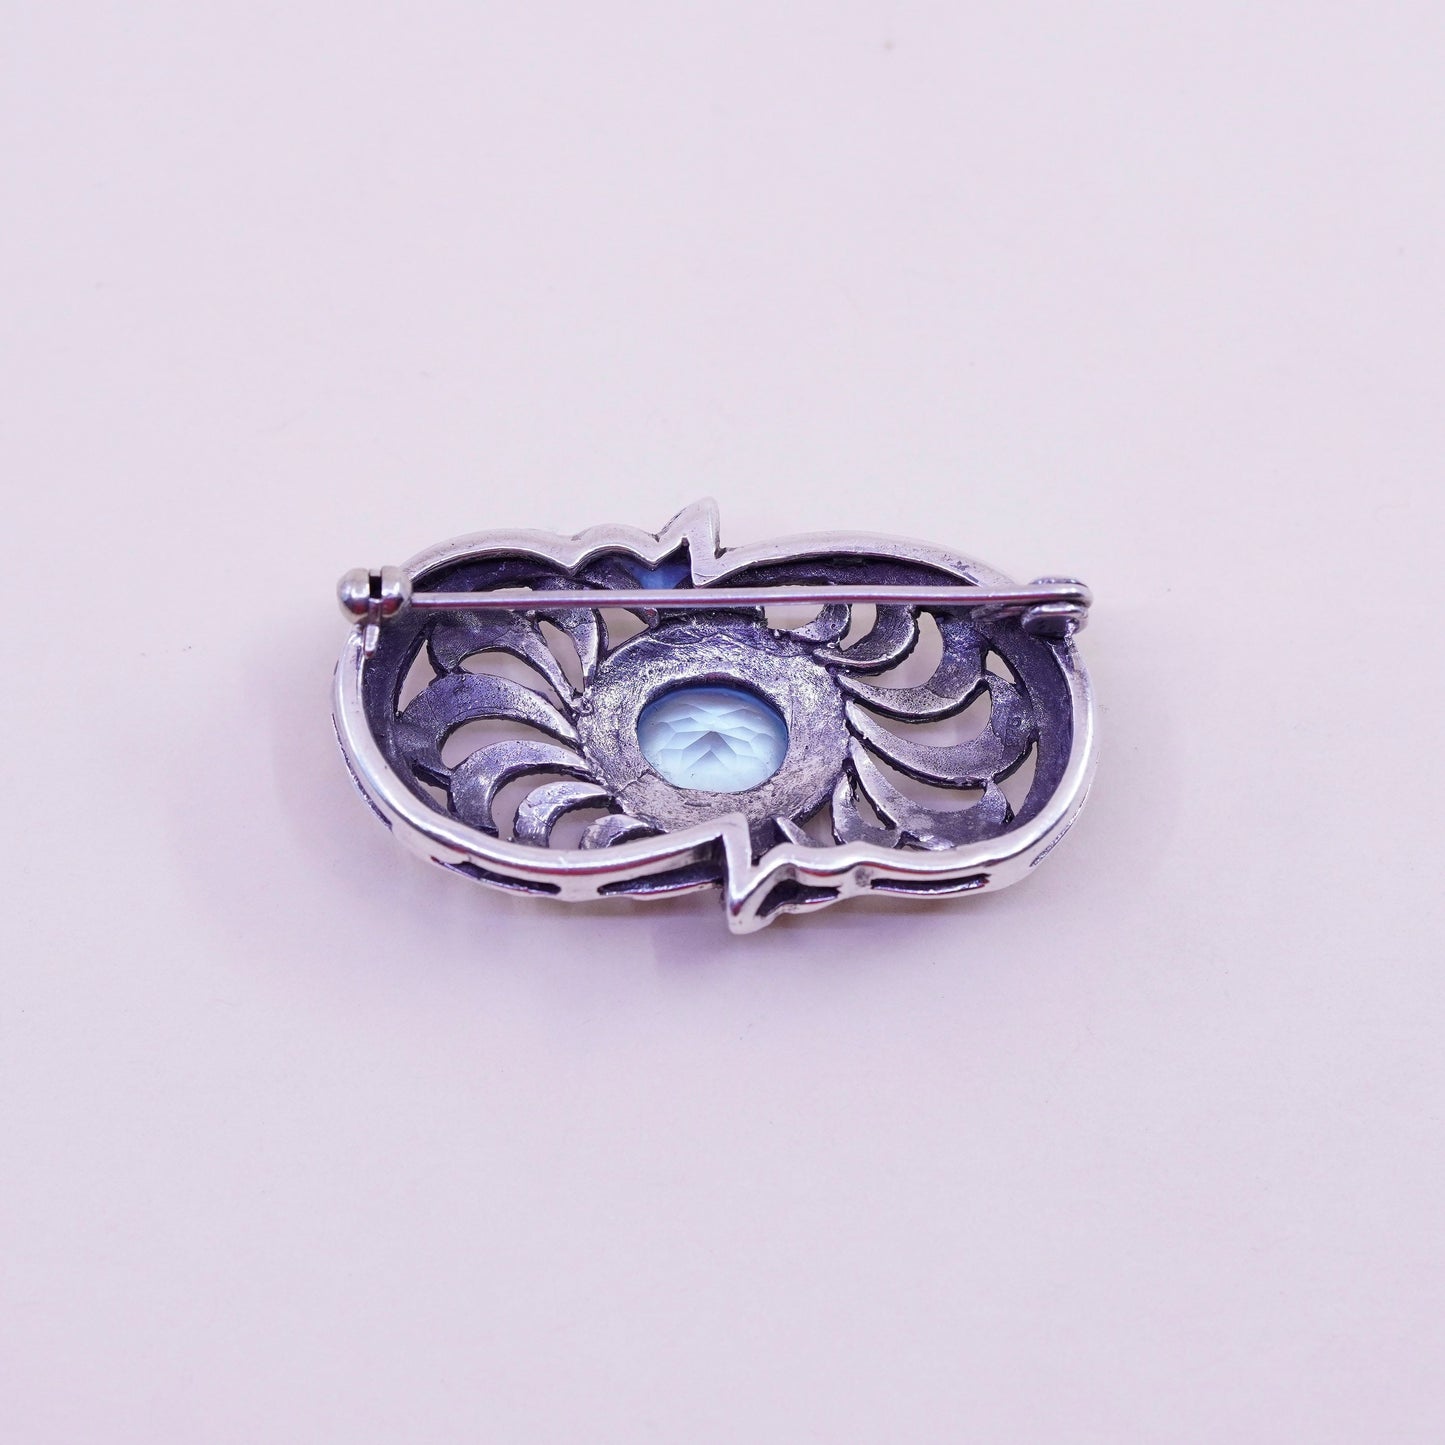 Vintage Sterling 925 silver handmade filigree brooch with topaz and marcasite